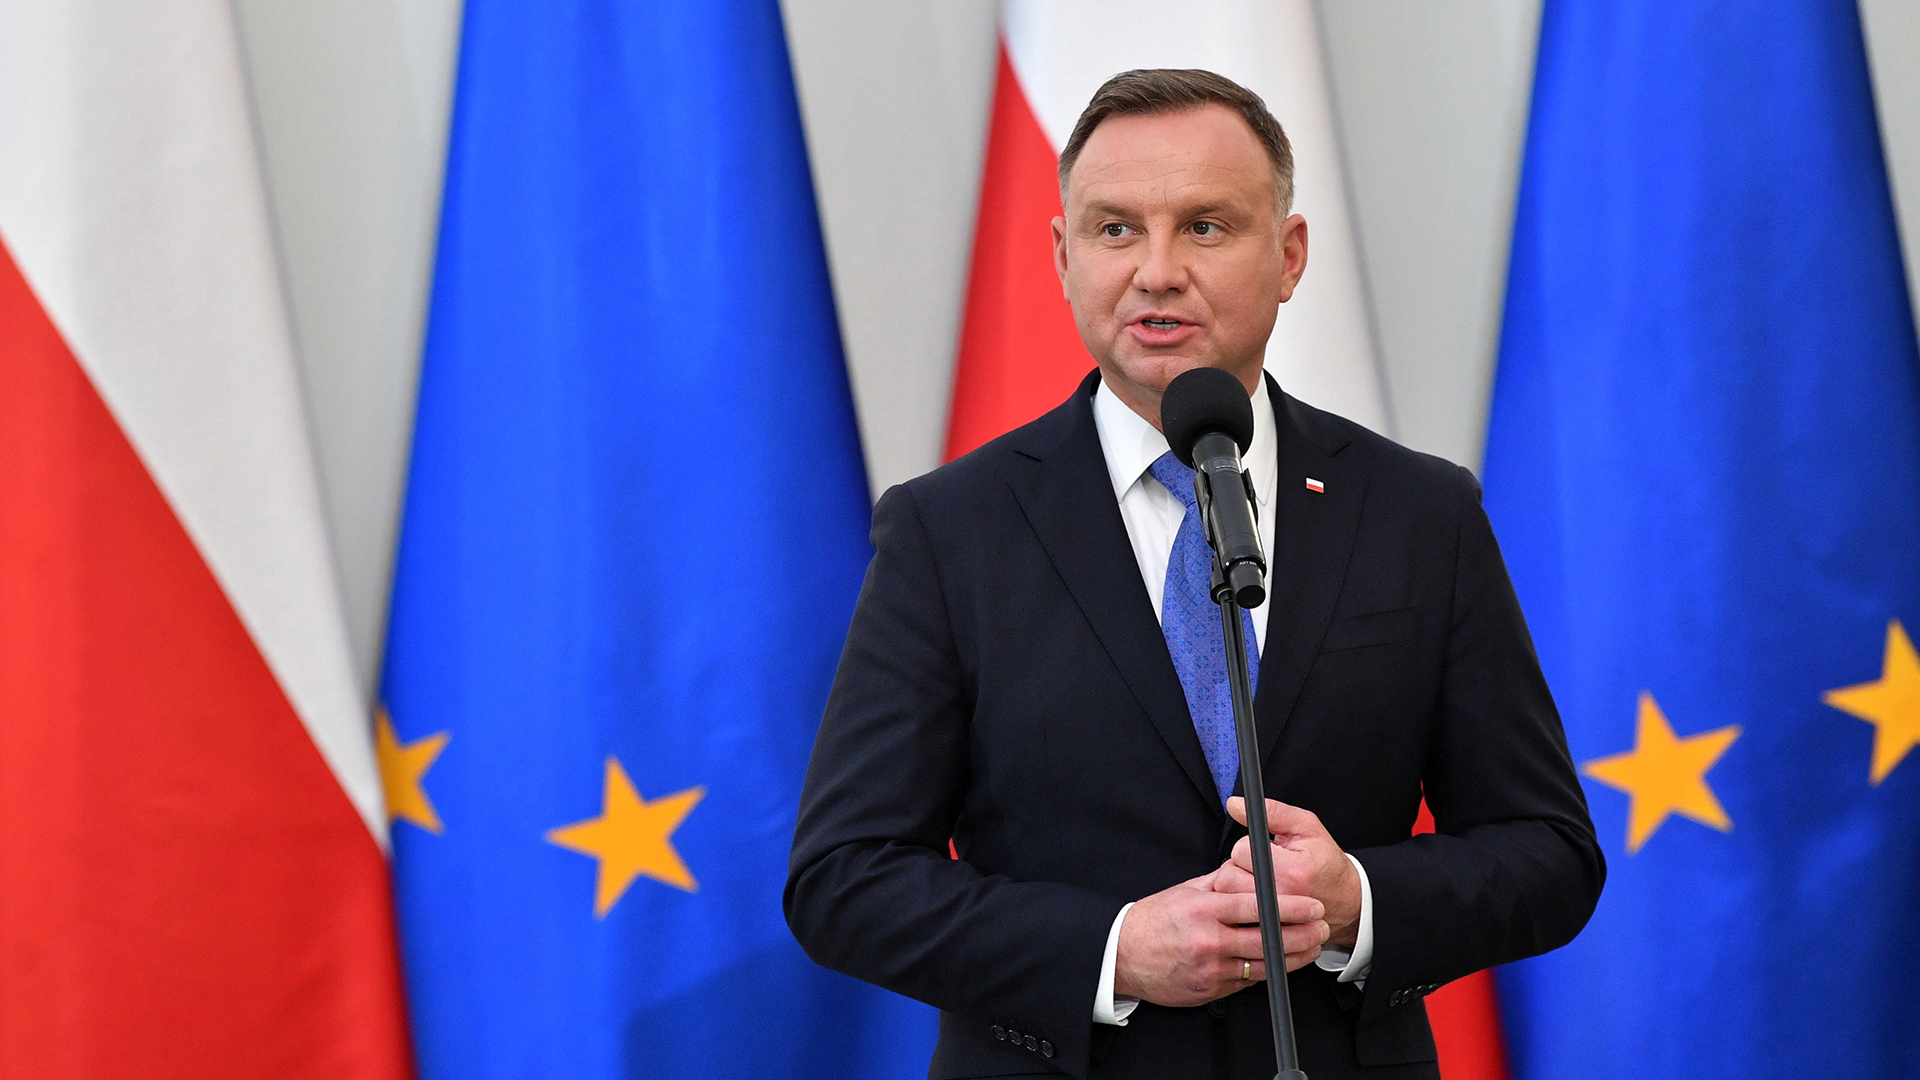 Andrzej Duda | picture alliance/dpa/PAP